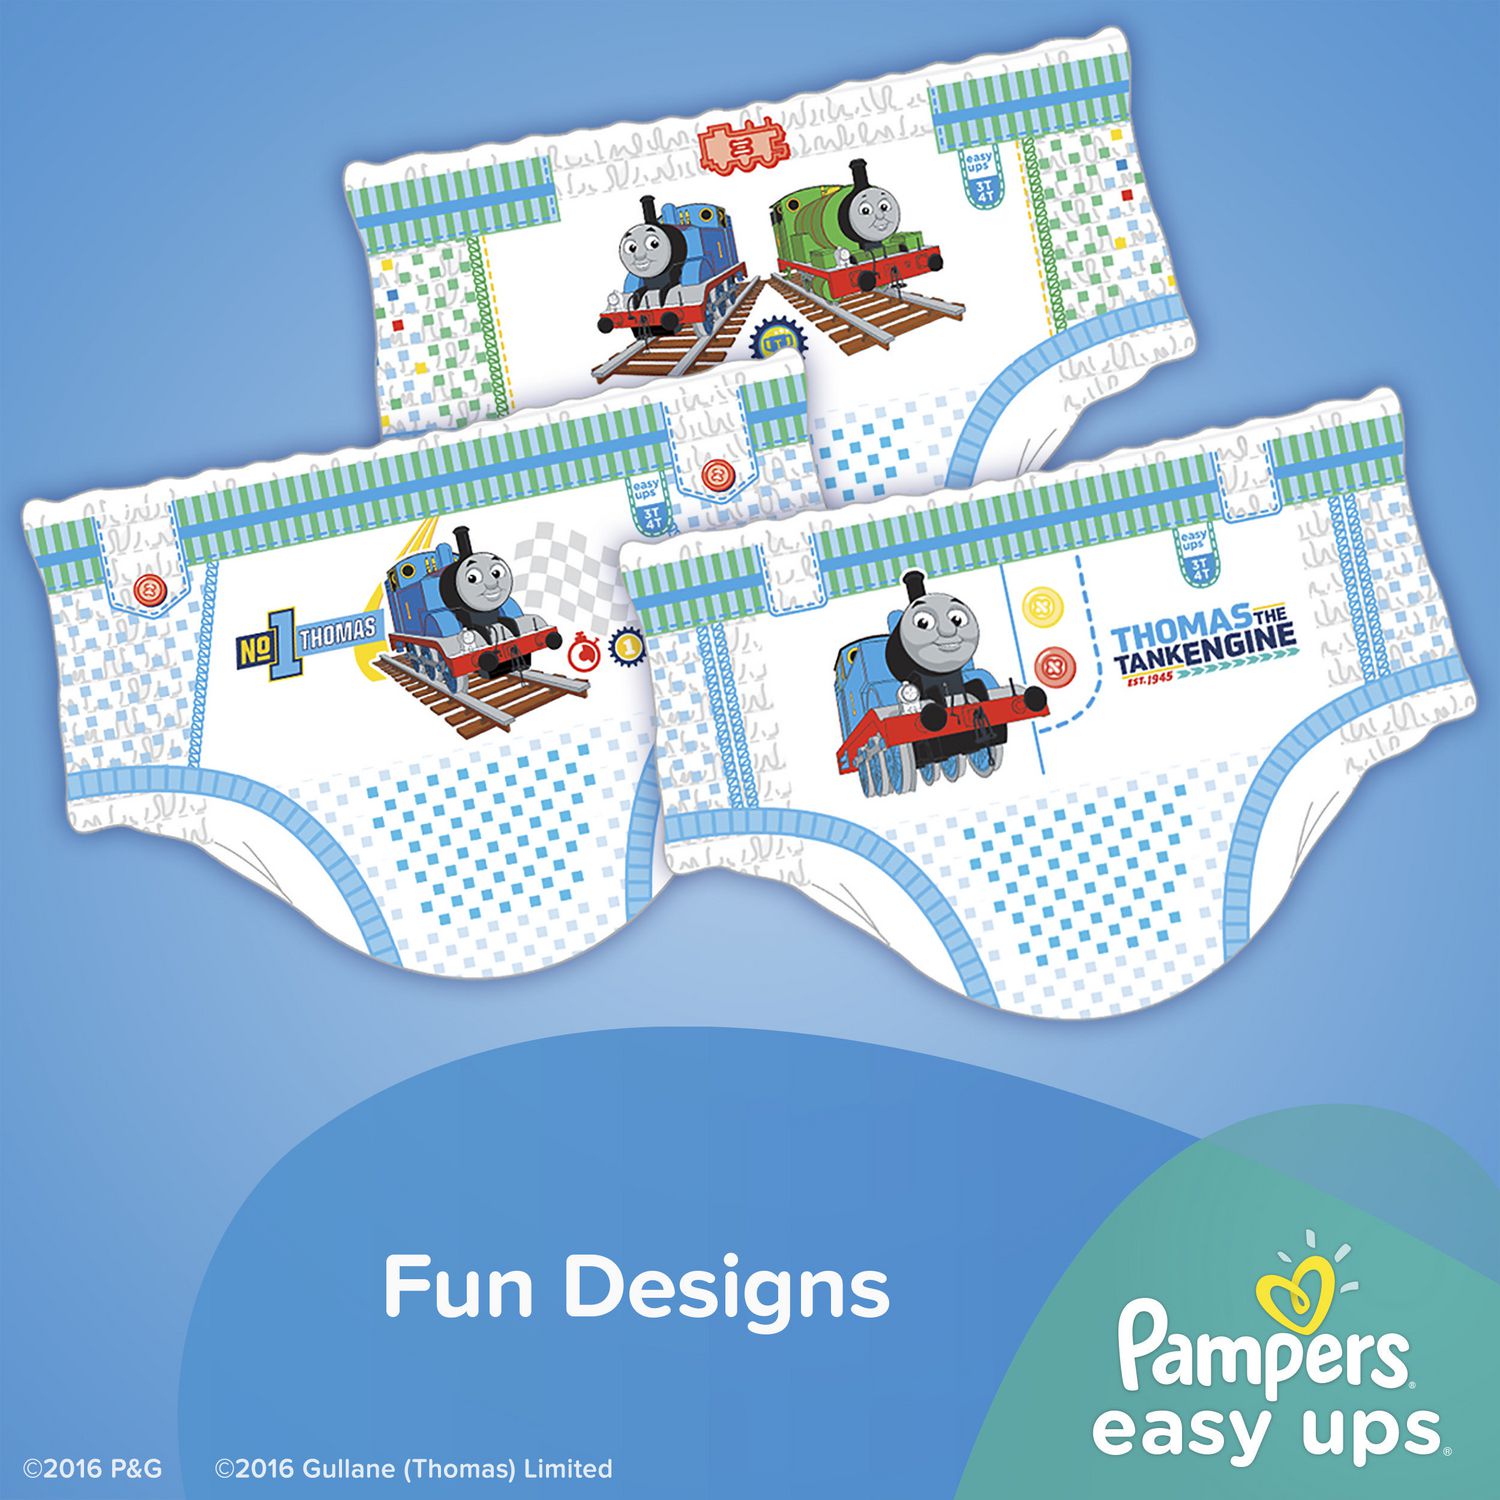 Pampers Easy Ups Thomas & Friends™ Training Underwear Size